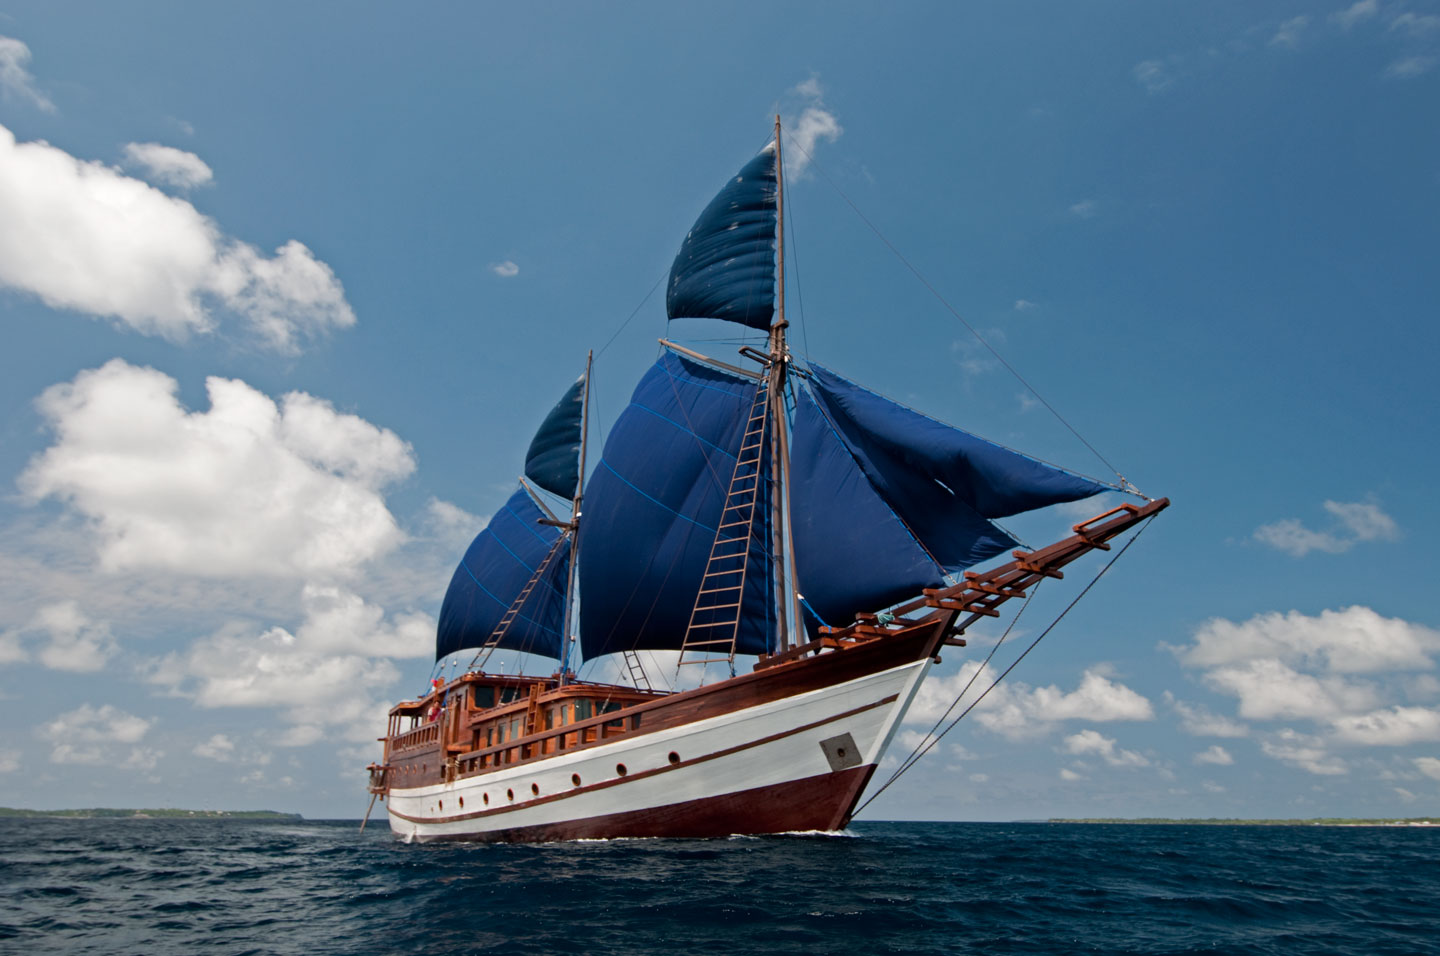 Phinisi : Luxurious and thoughness from Bulukumba boat maker